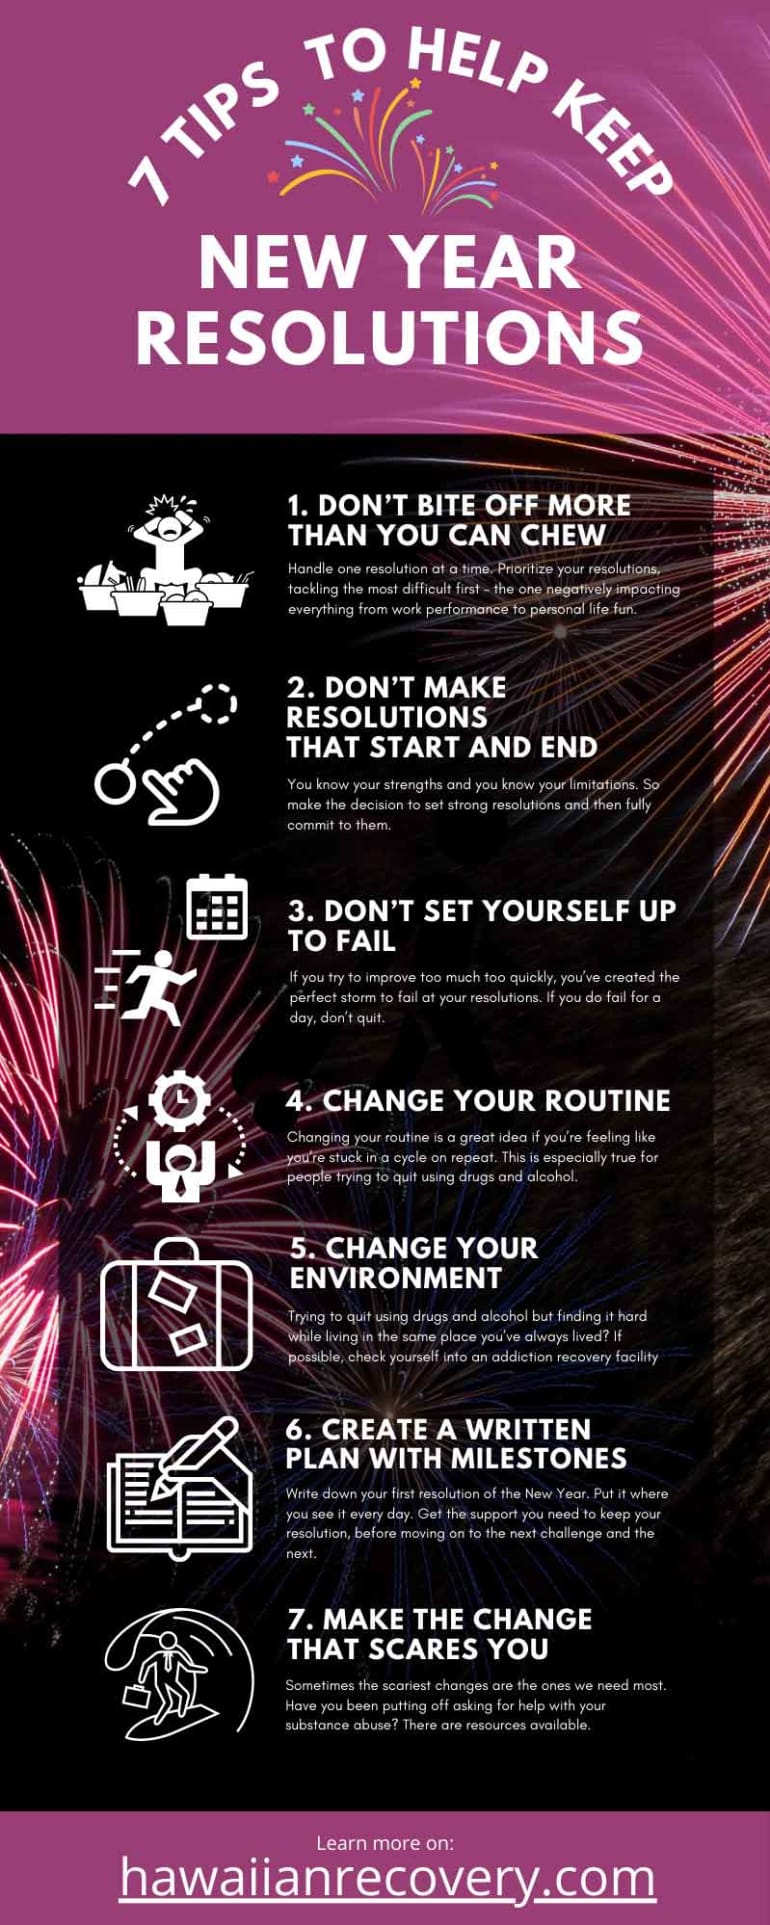 TIPS TO HELP KEEP NEW YEAR RESOLUTIONS FOR 2021